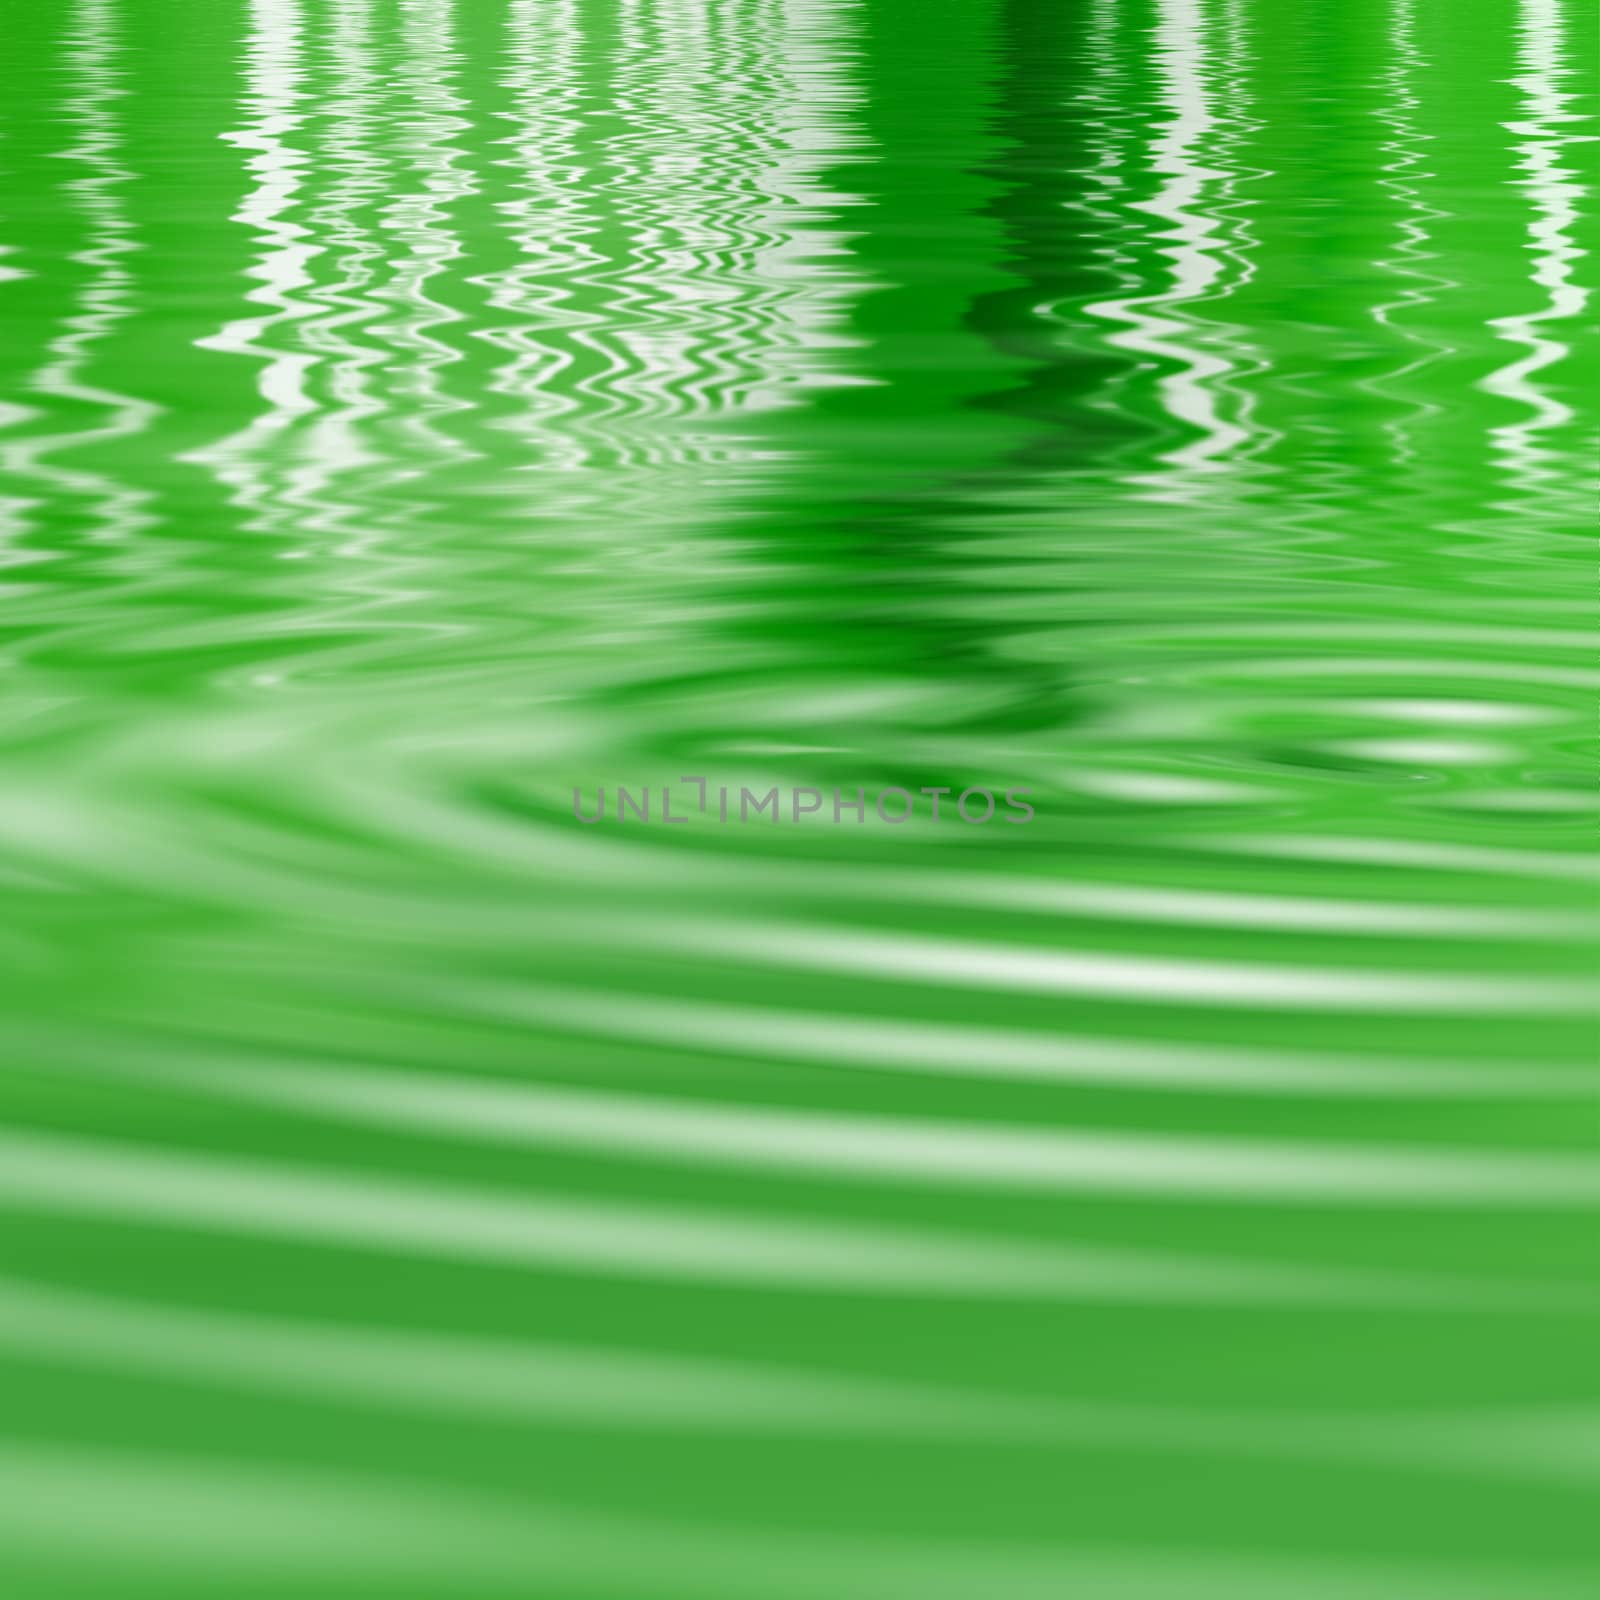 The green image of a wavy water surface